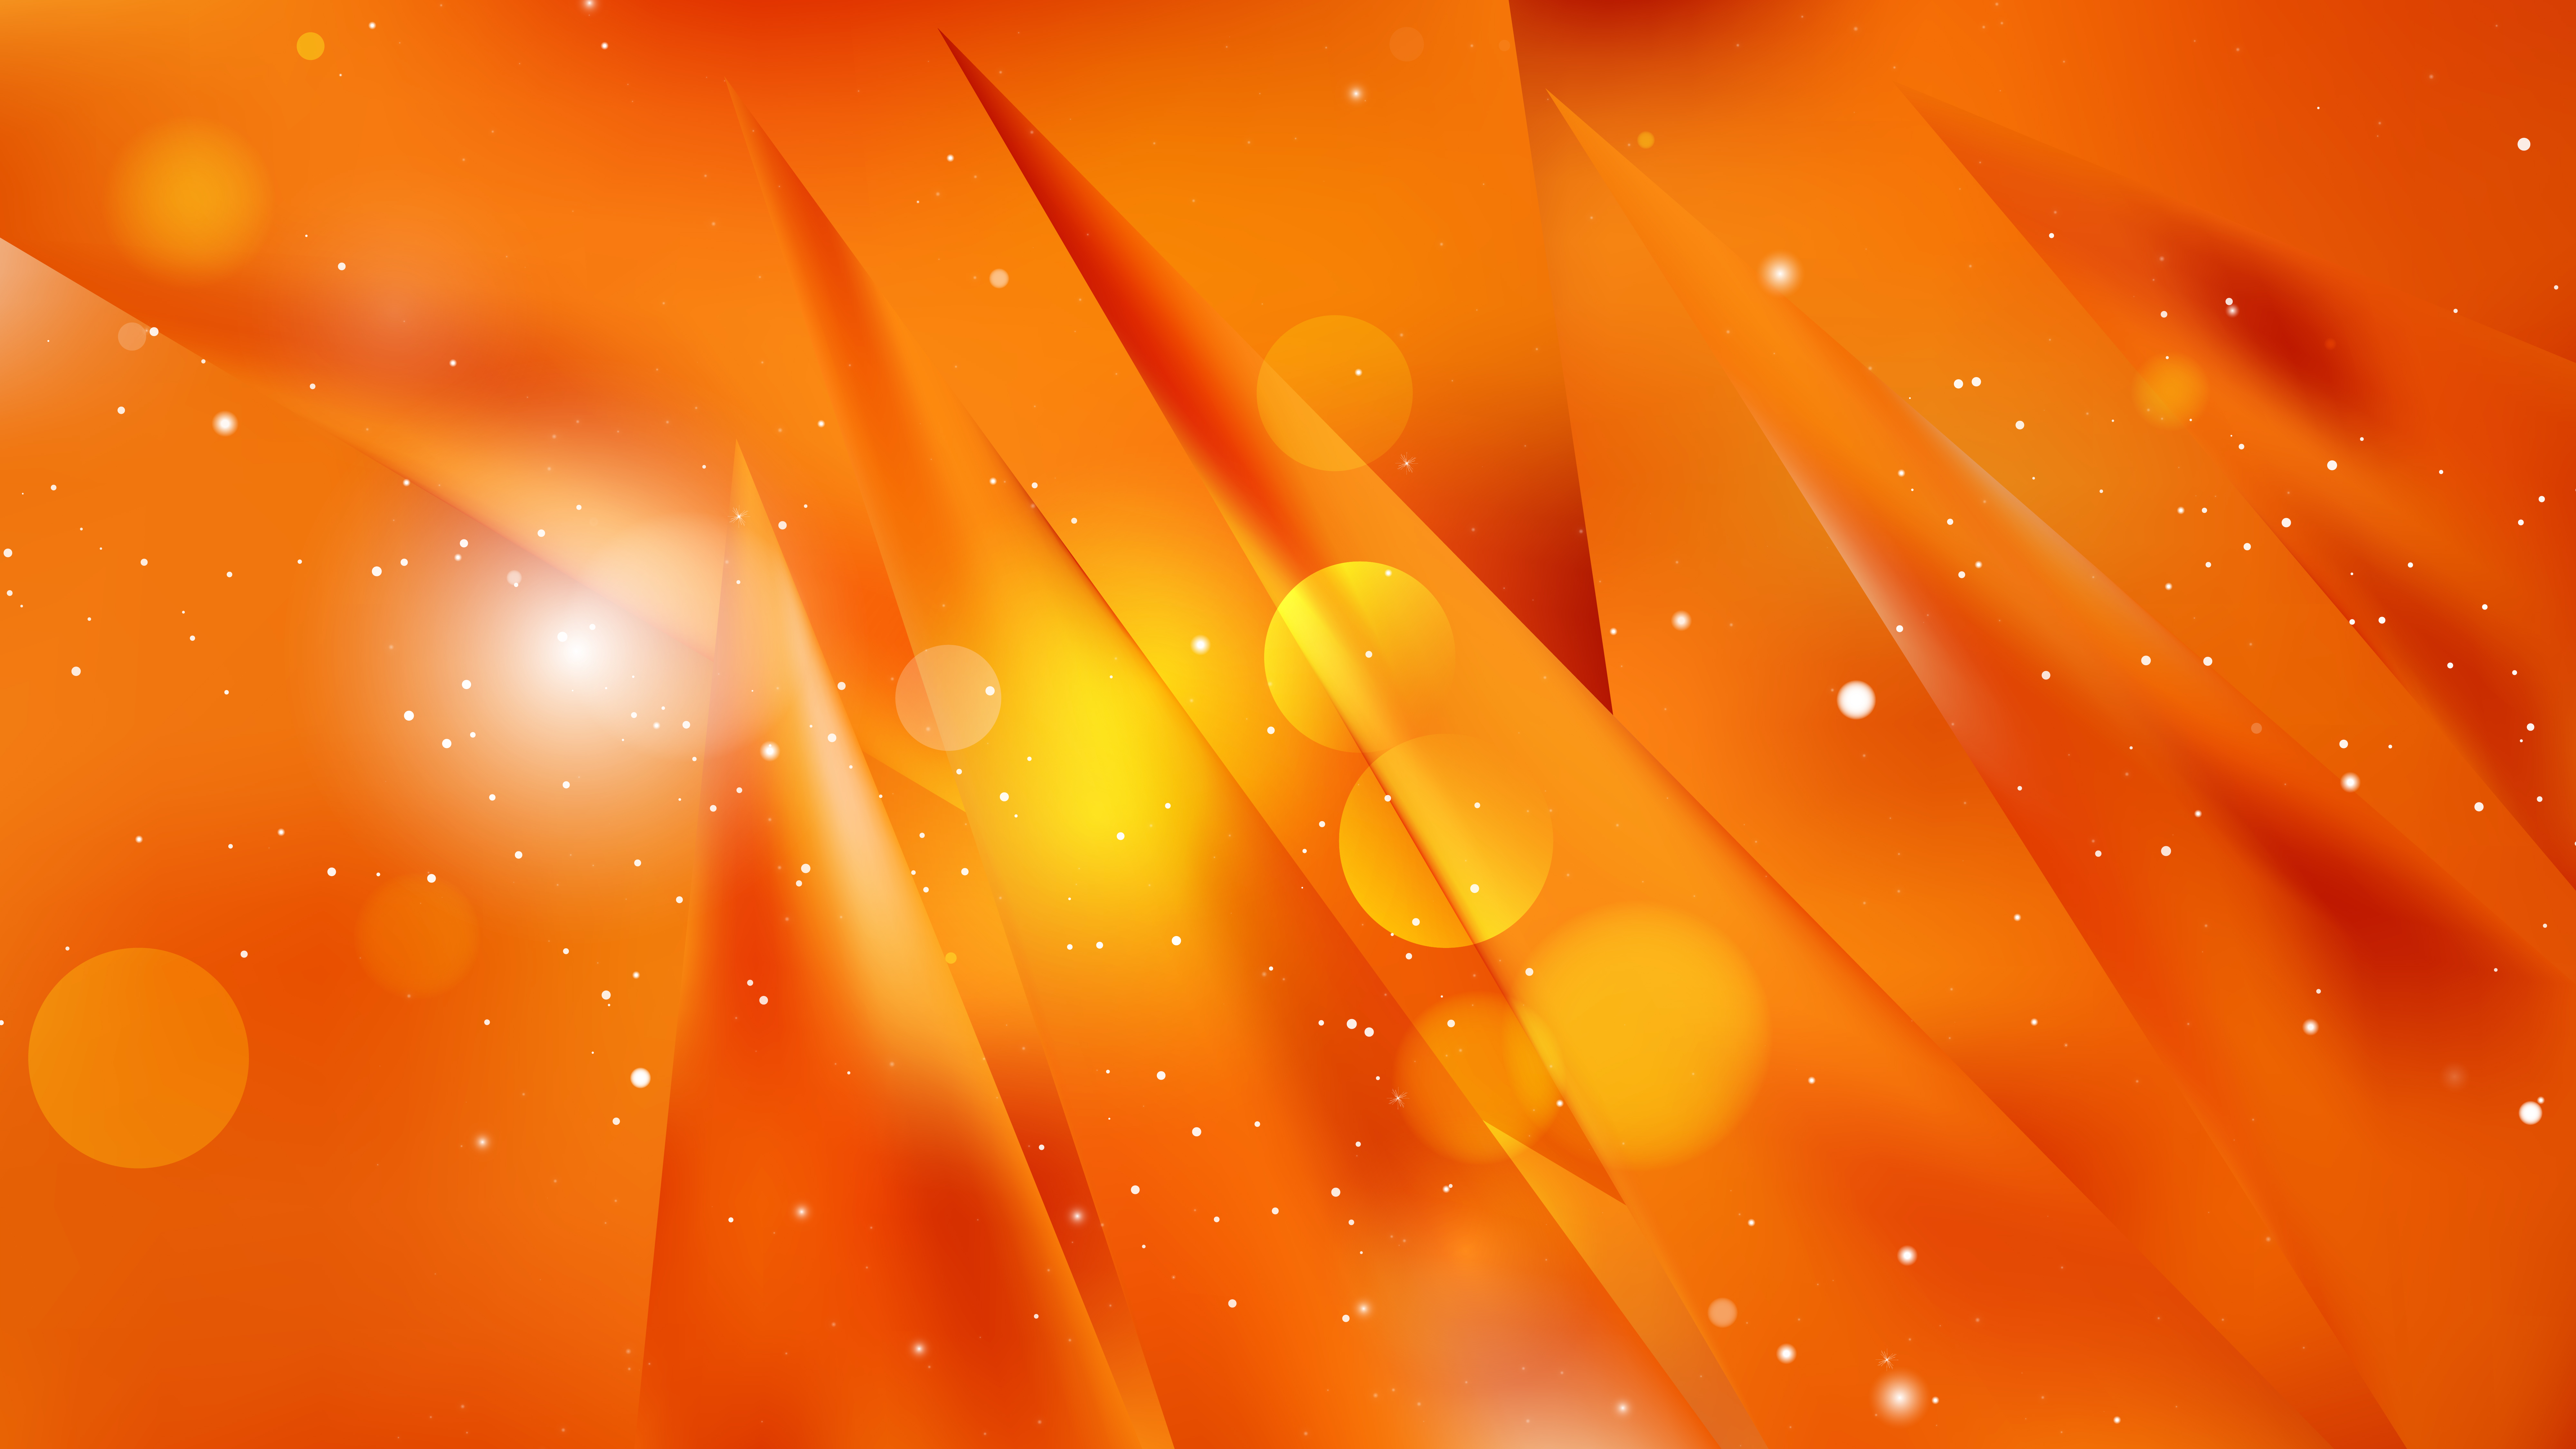 Abstract Bright Orange Background Graphic